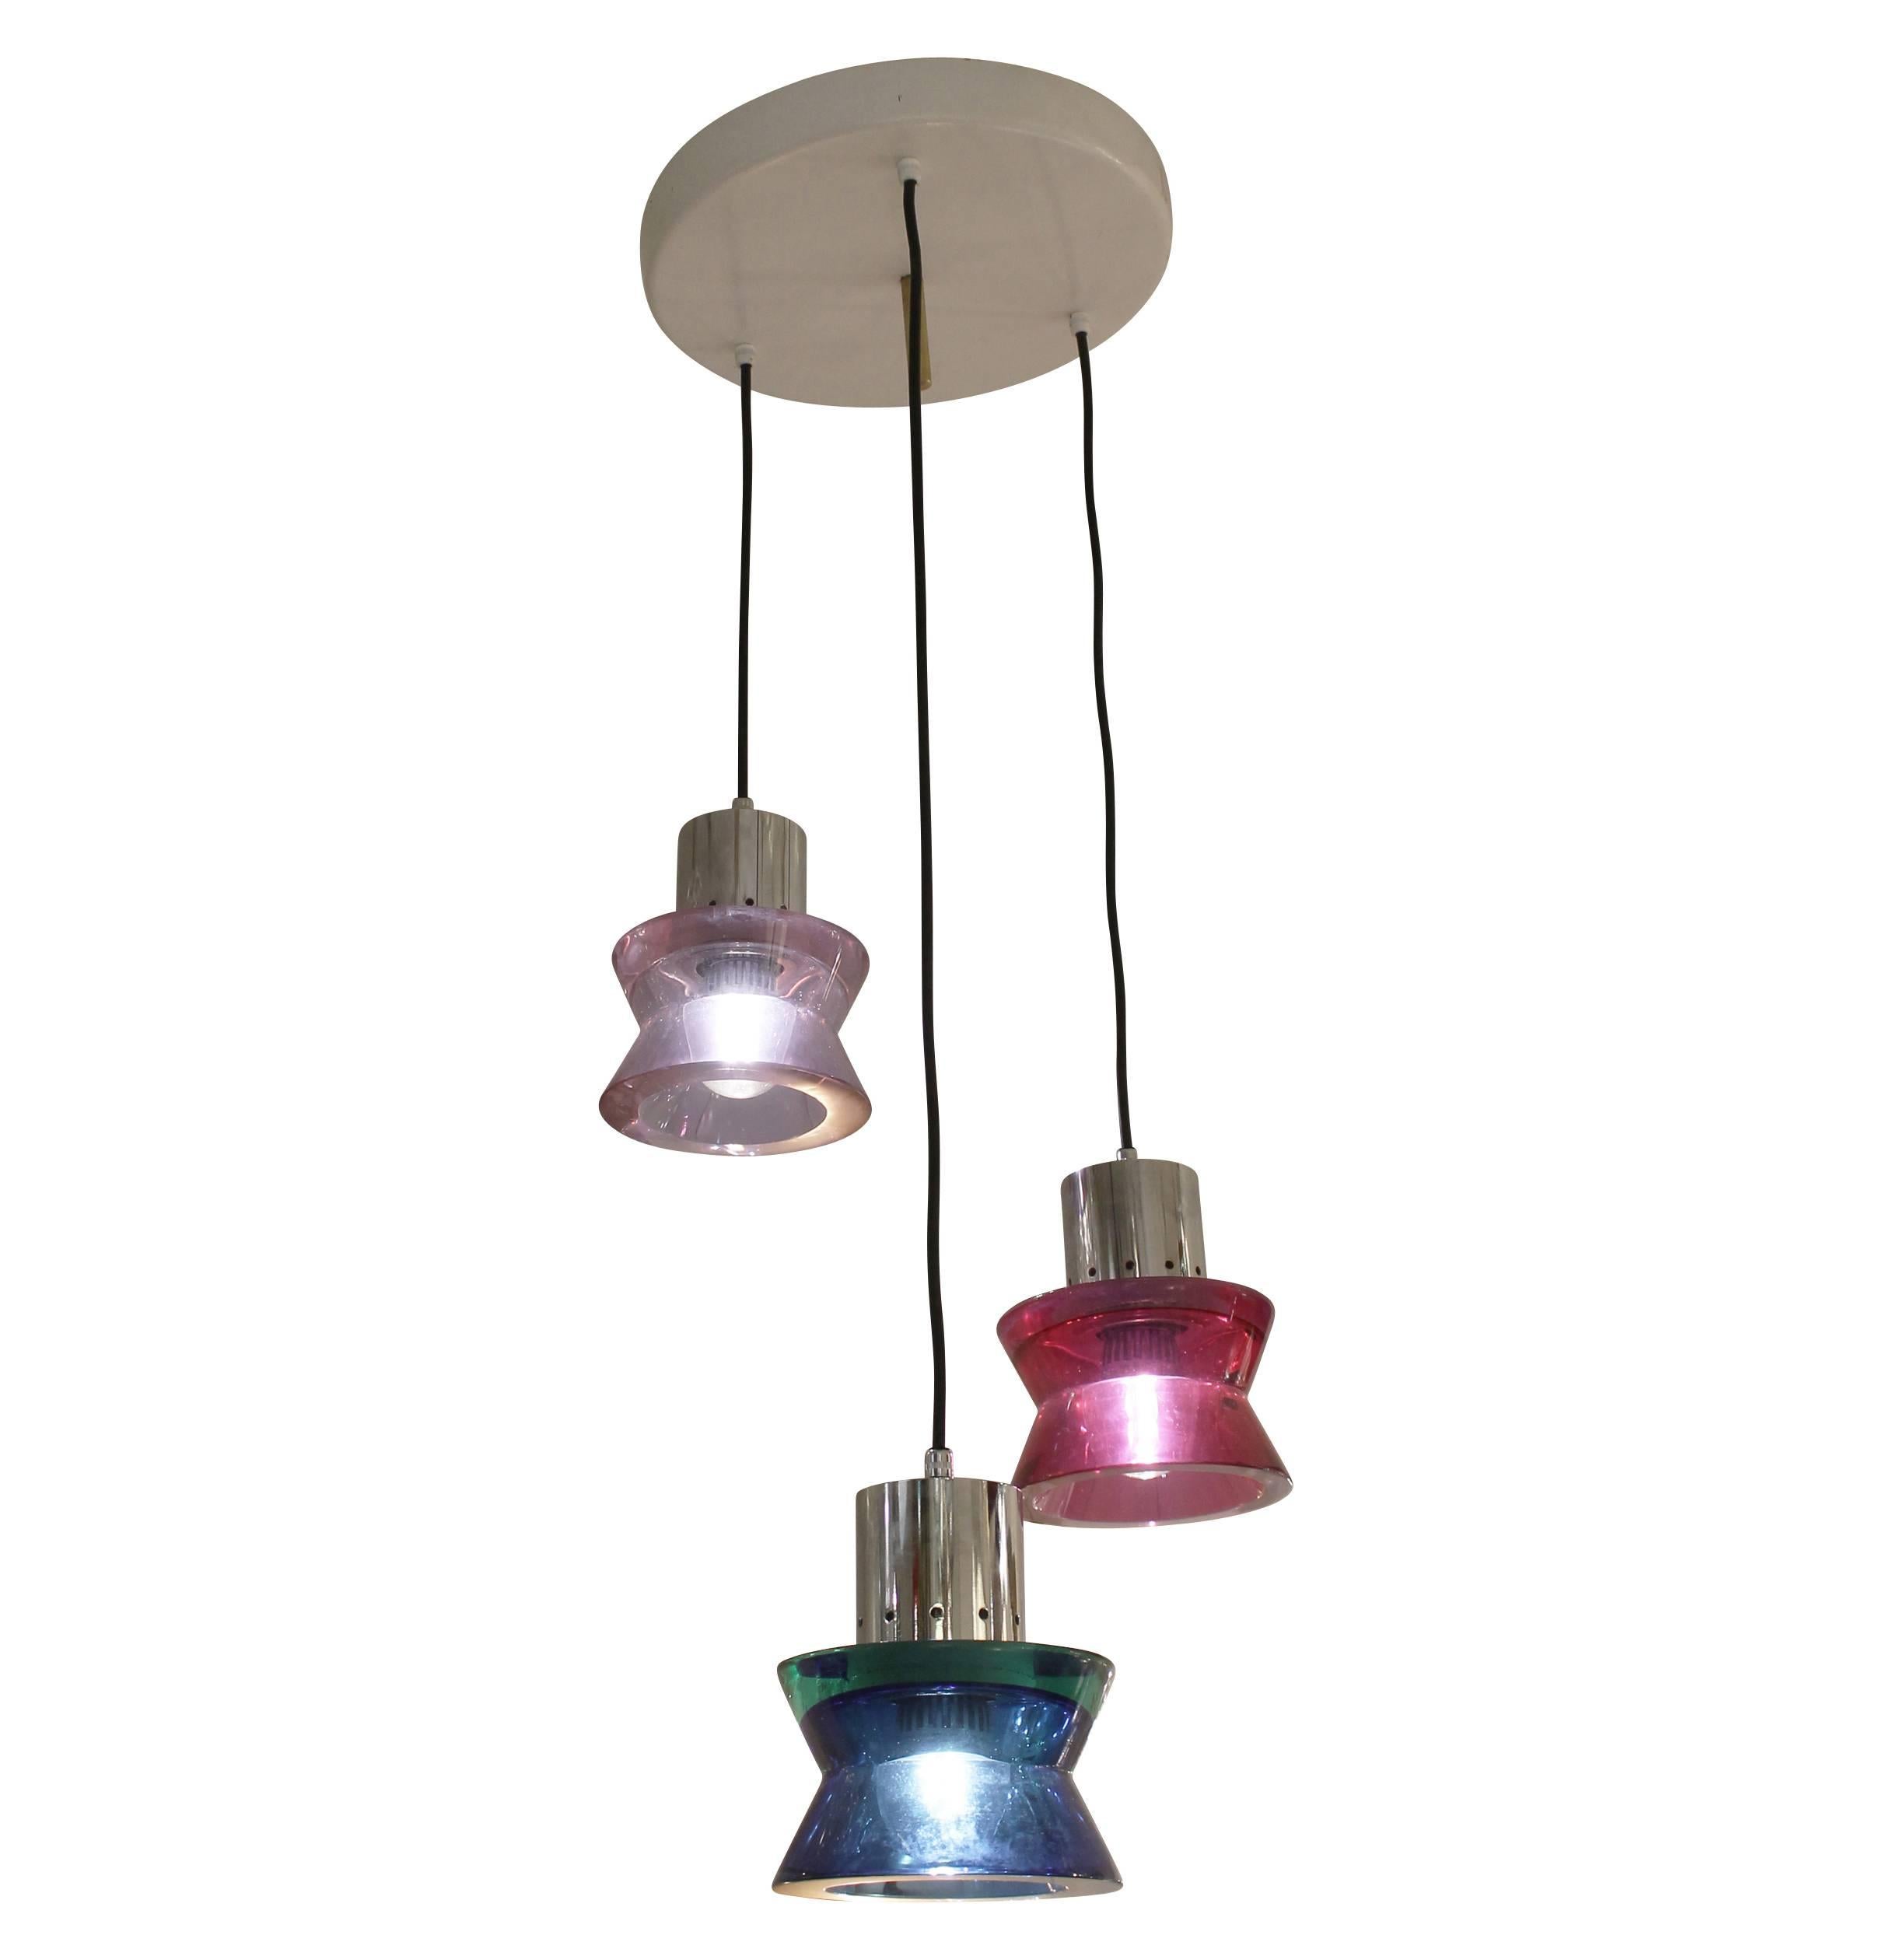 Colorful fixture composed of three beautiful and vibrant Murano glass pendants. Height of each pendant can be easily adjusted and color of the canopy can be changed upon request. Each pendant holds one regular Edison socket.
